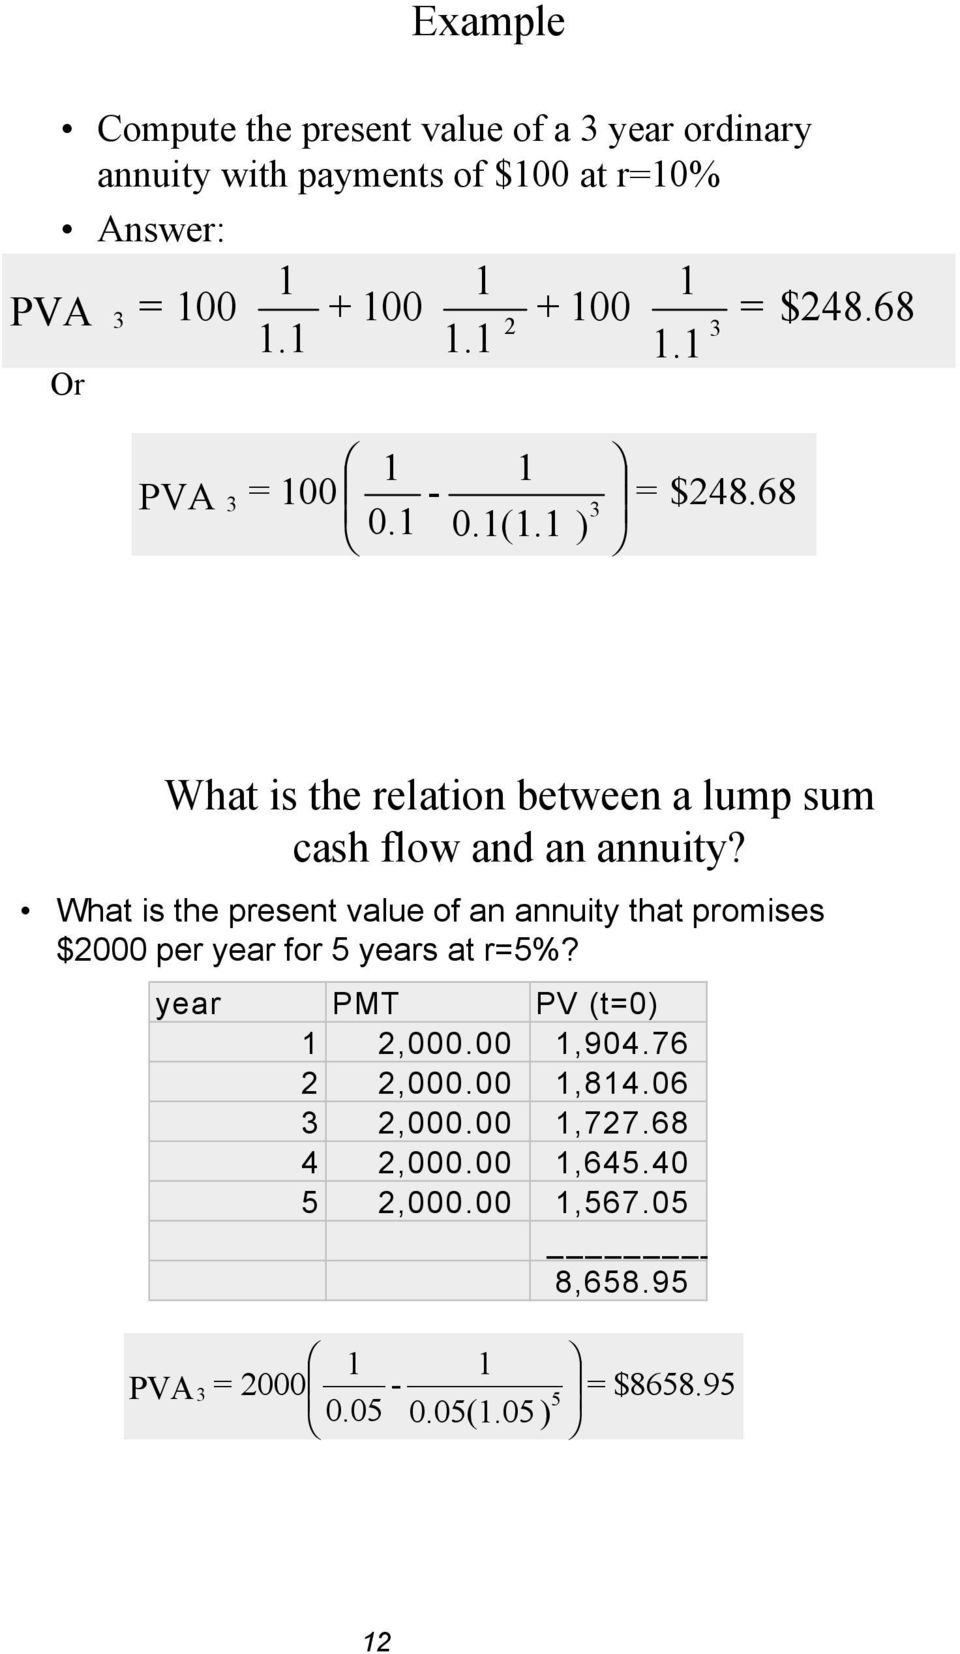 What is the present value of an annuity that promises $2000 per year for 5 years at r=5%? year PMT PV (t=0) 1 2,000.00 1,904.